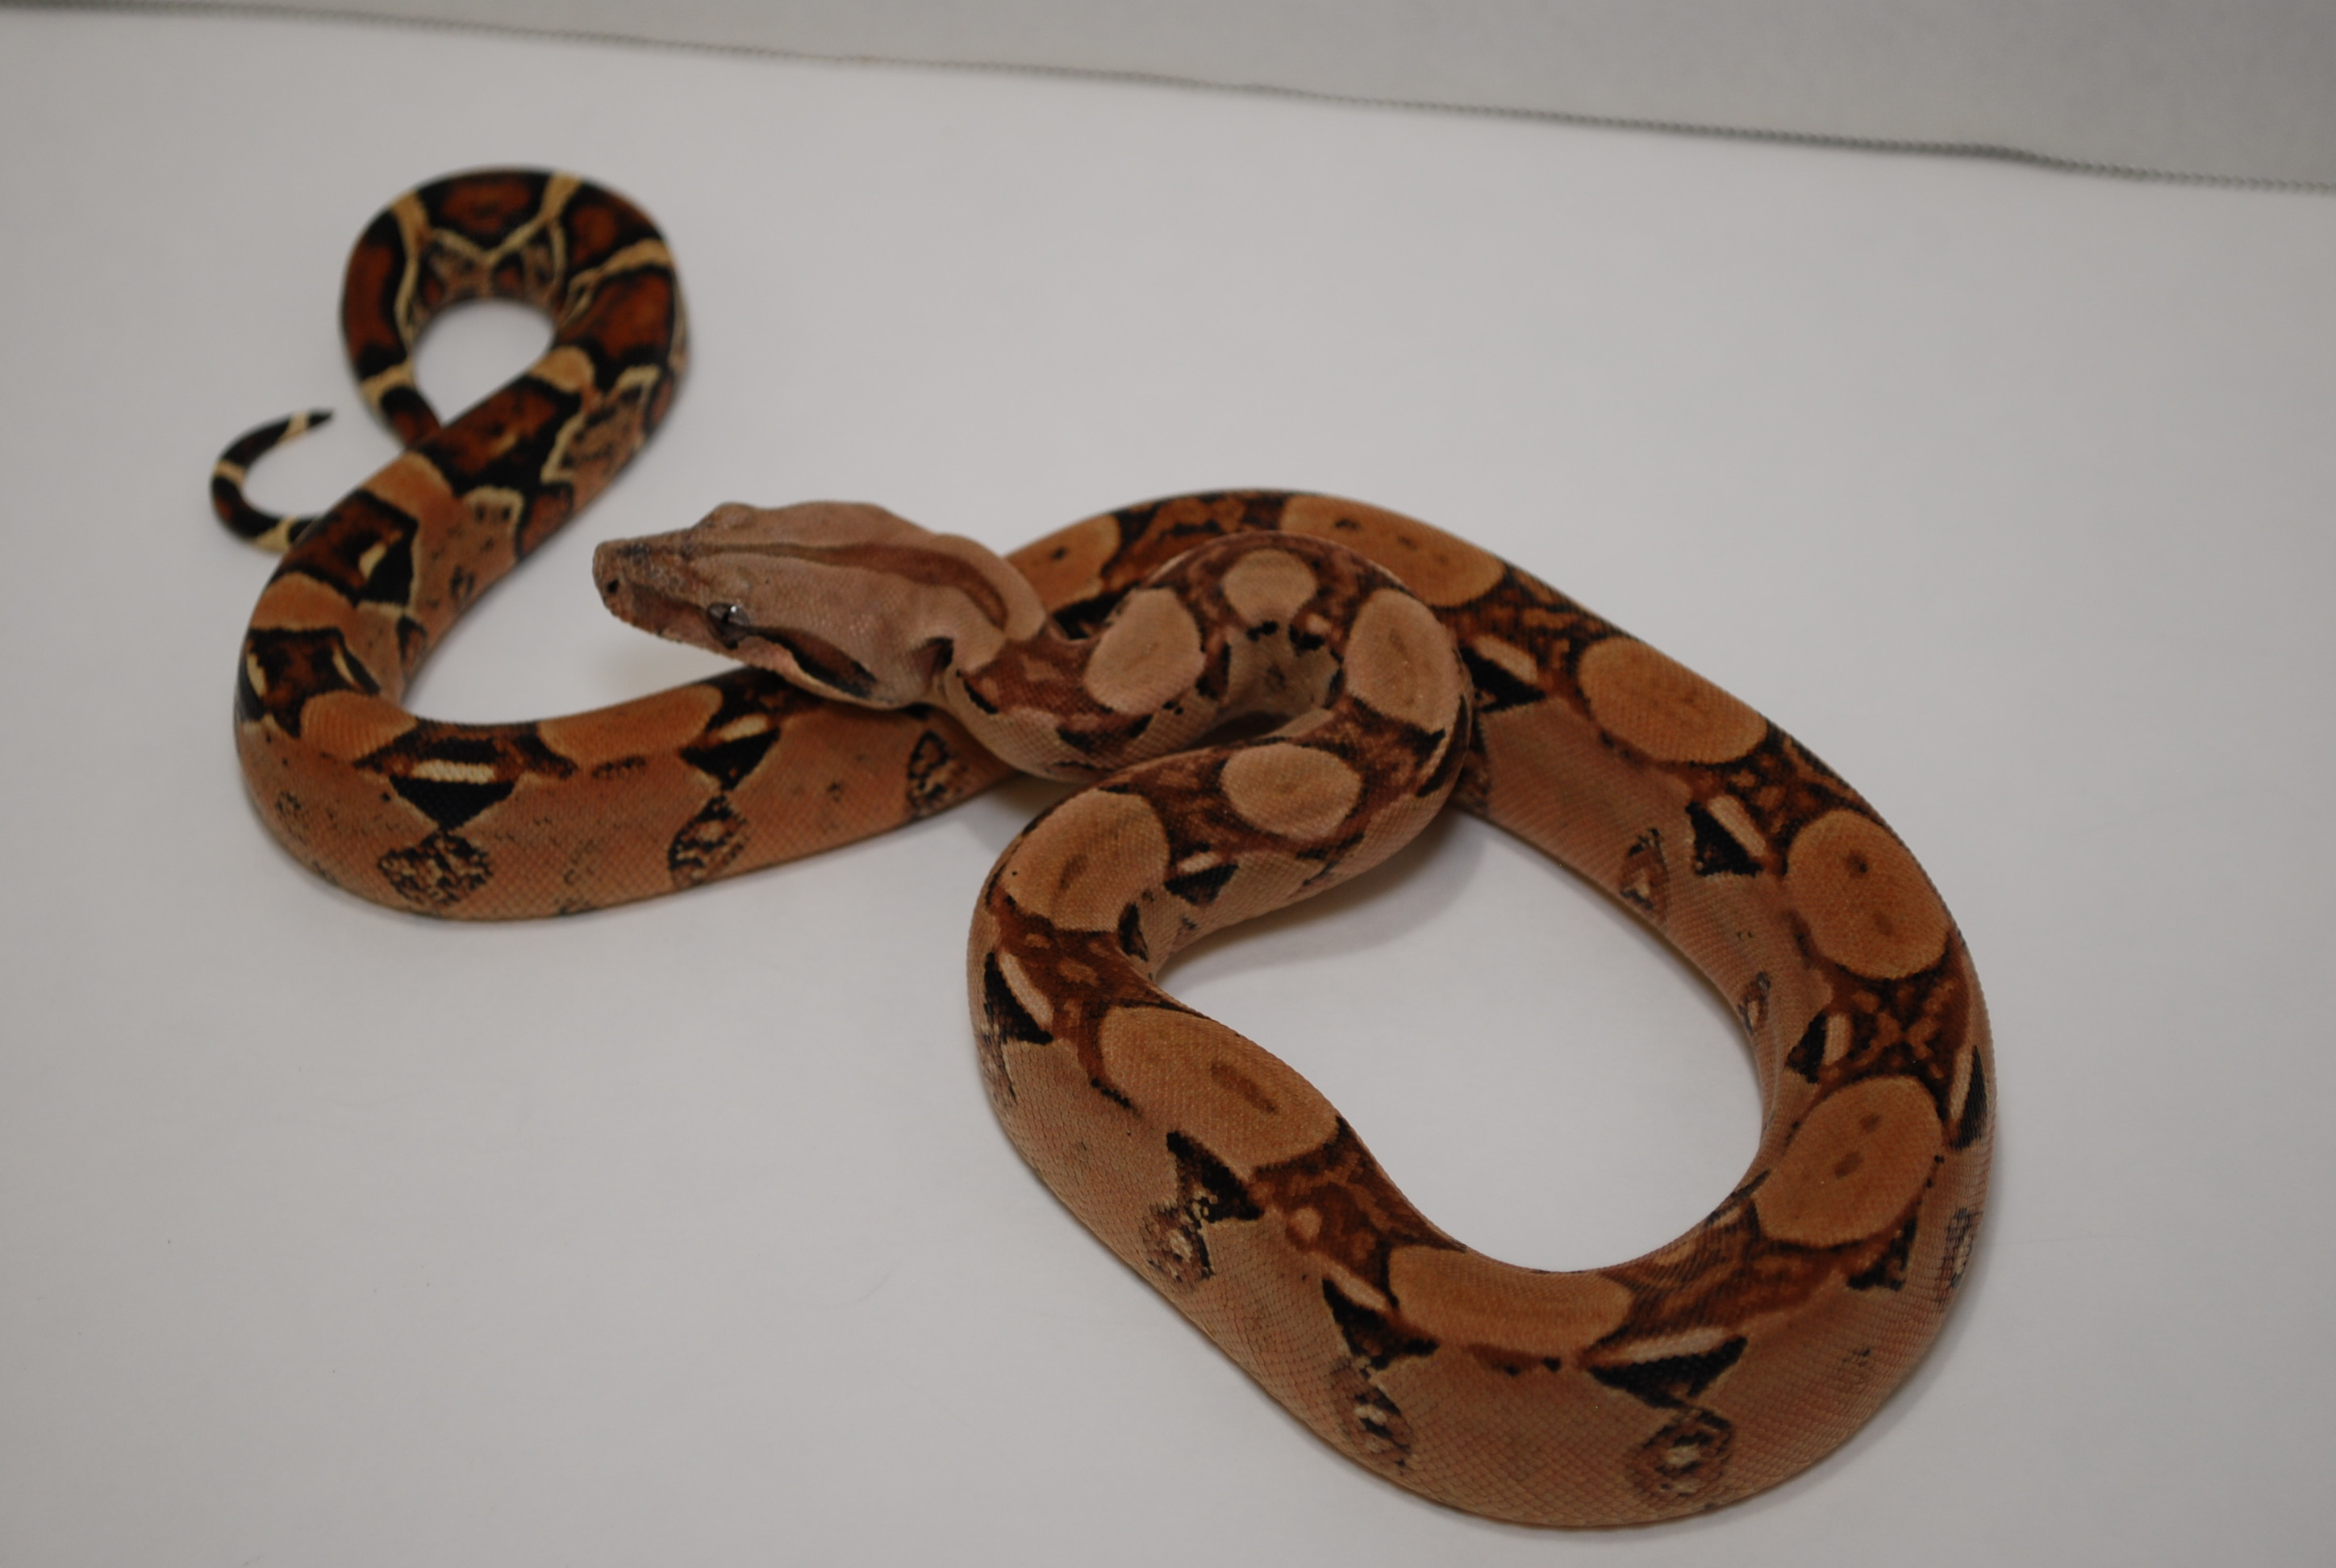 Squaretail Boa Constrictor by R And R Boas